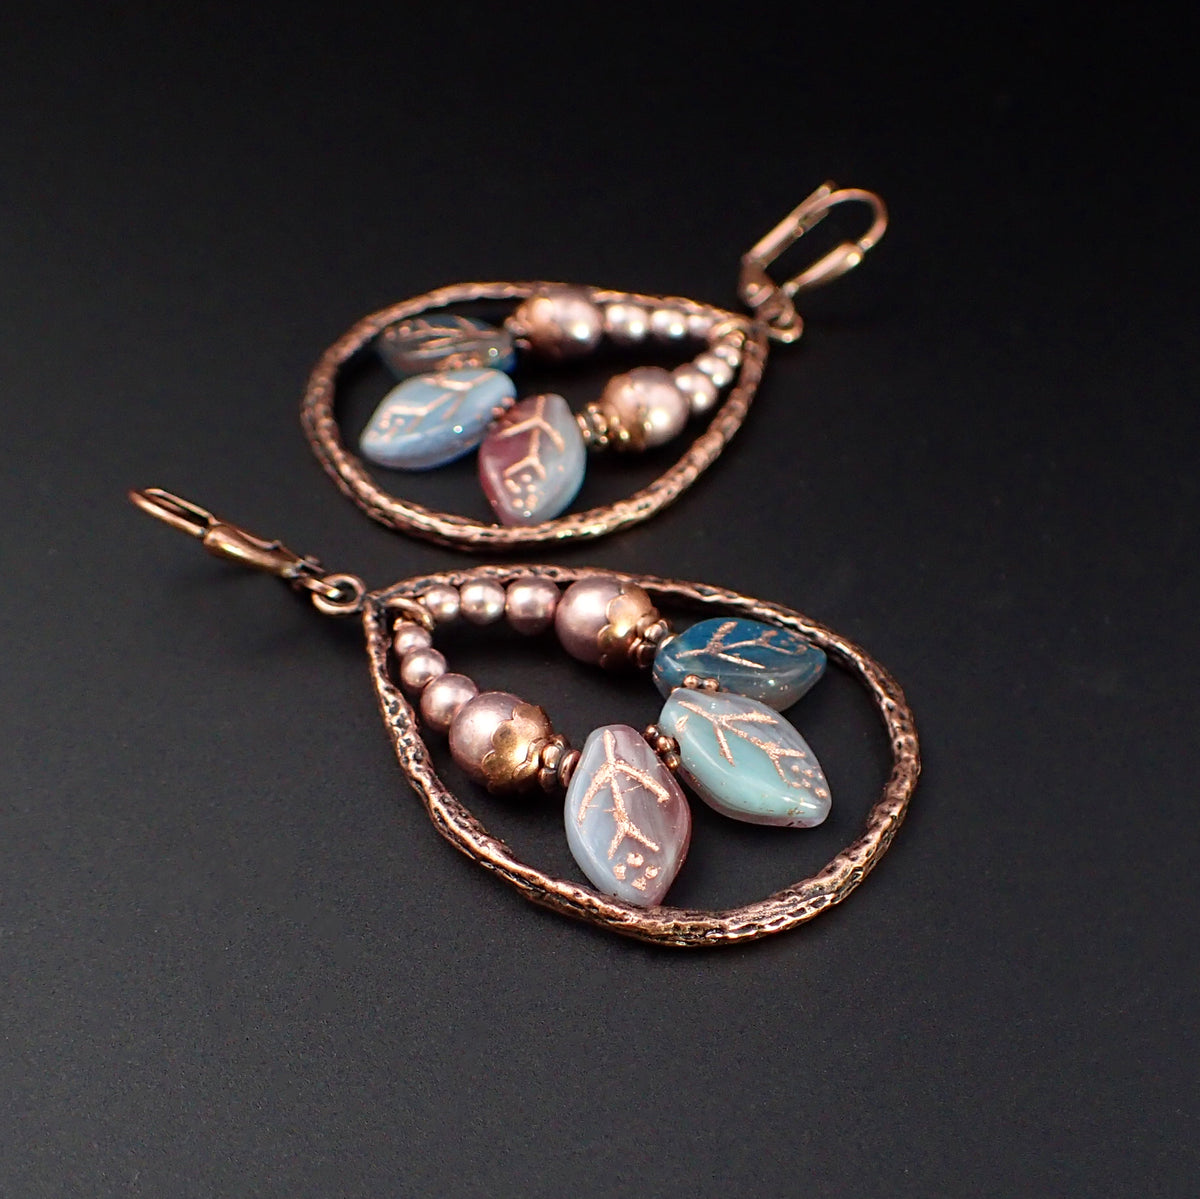 Vintage Bohemia Drop Earrings with Colored Beads Copper Suspension